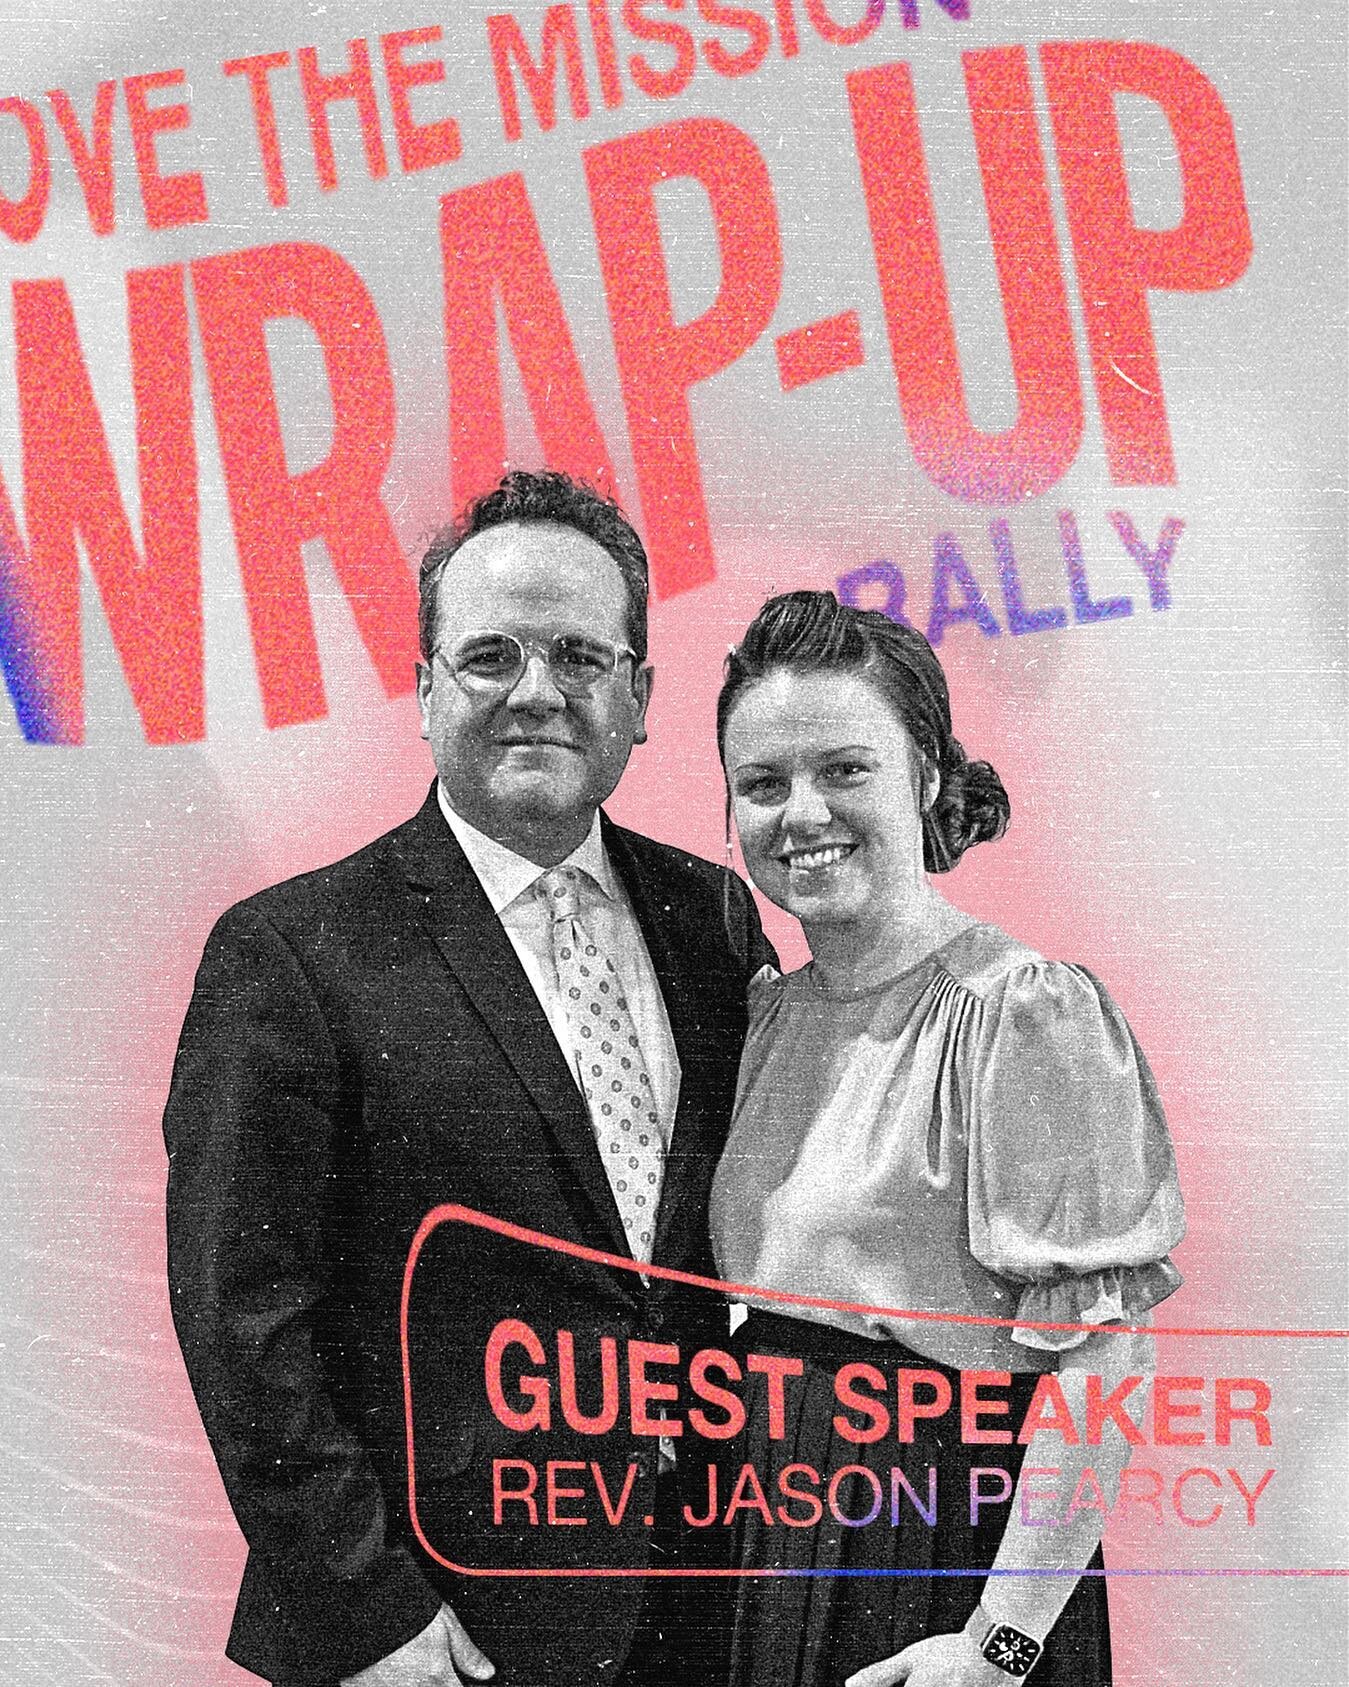 We&rsquo;re super pumped to have Rev. Jason Pearcy (@jpearcy) joining us for our #MTM Wrap-Up Rally!

Don&rsquo;t miss it!